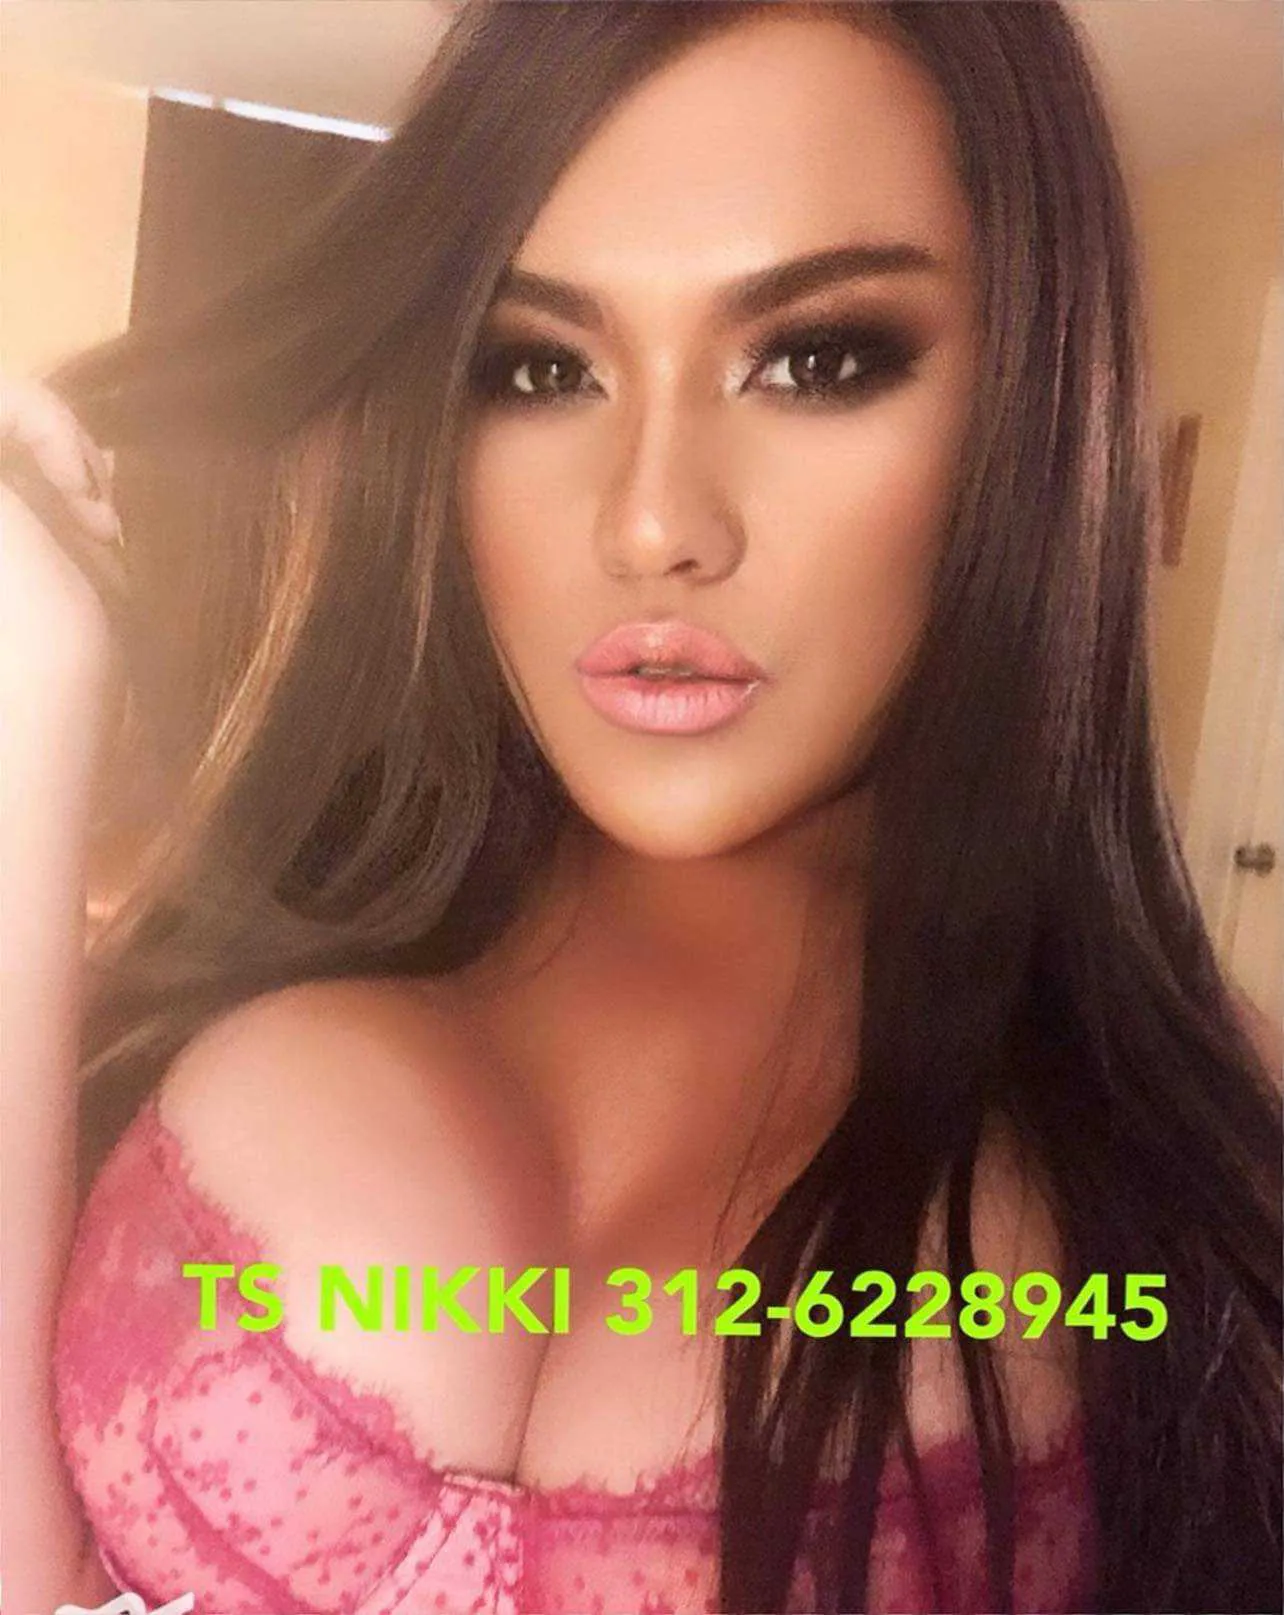 Reviews about escort with phone number 3126228945